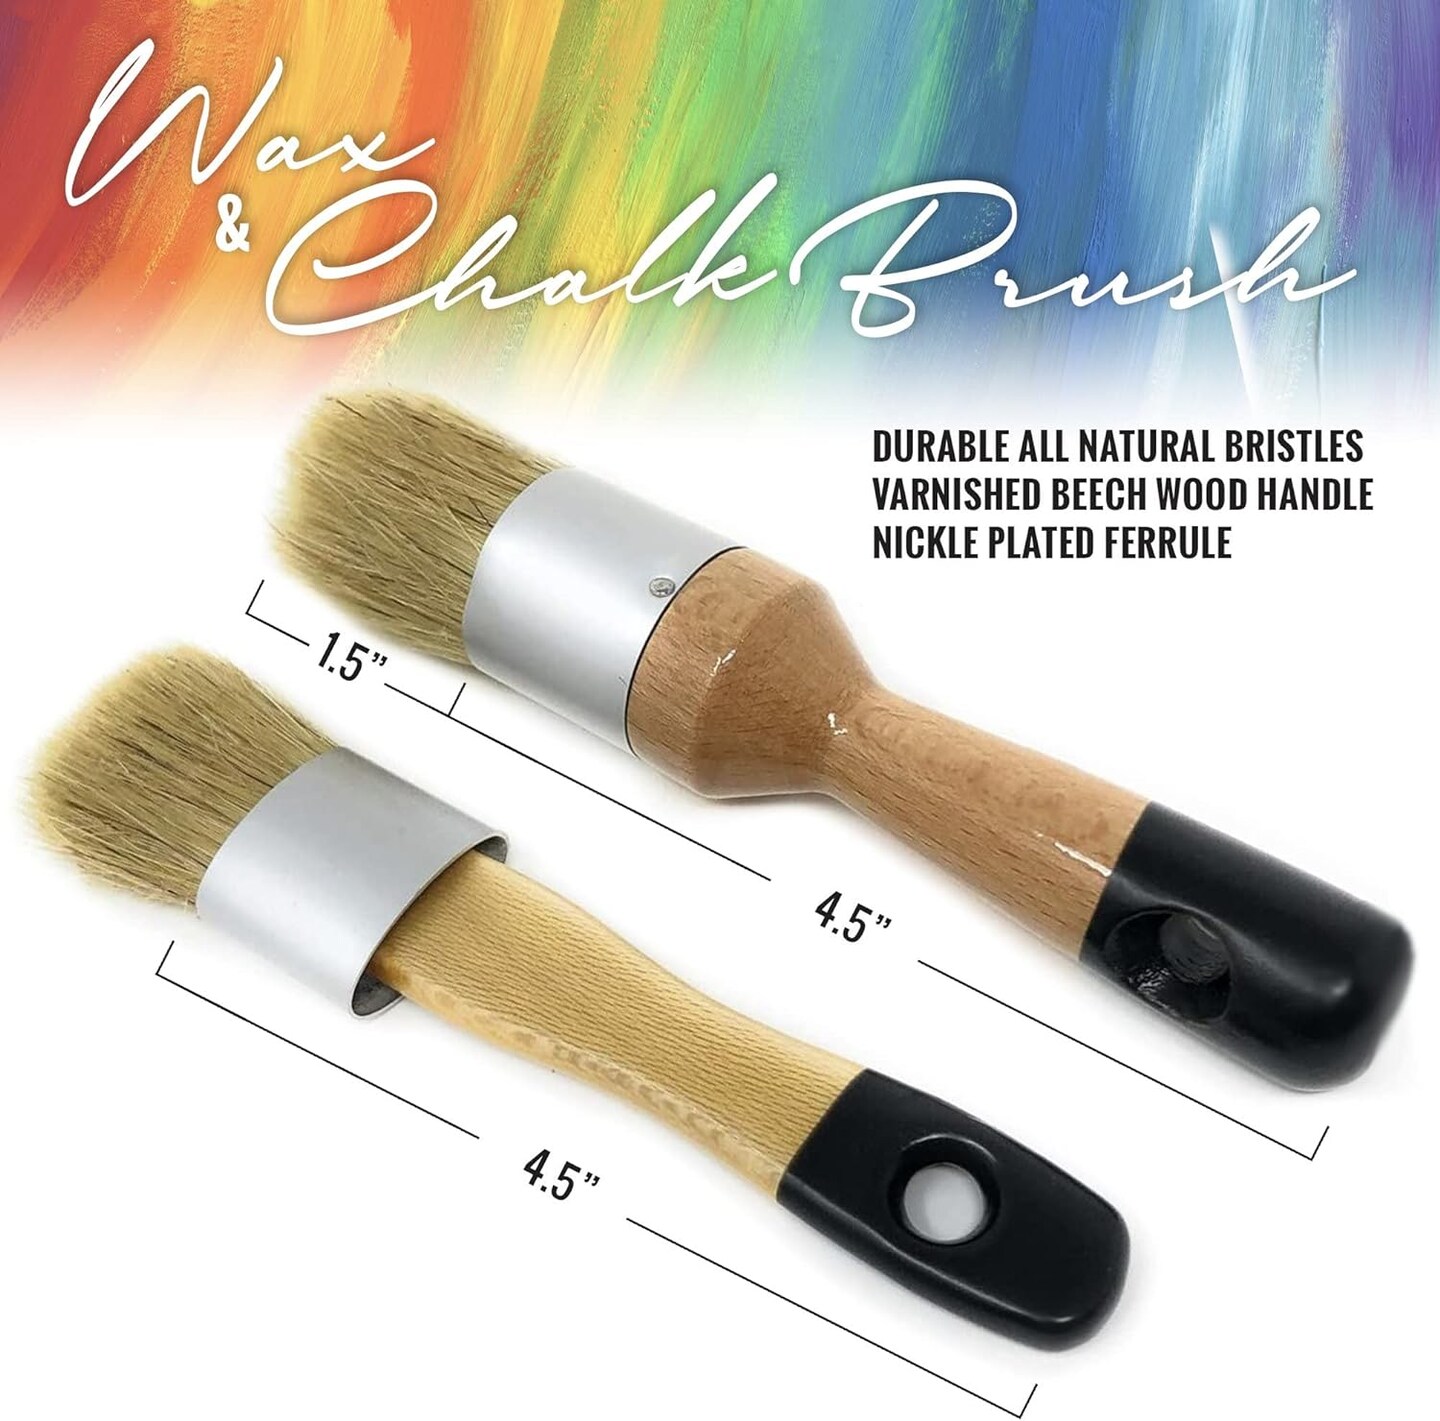 AMACO Rub n Buff Wax Metallic Finish 3 Color Kit - Antique Gold Silver Leaf  and Gold Leaf 15ml Tubes - Versatile Gilding Wax for Finishing Furniture  Antiquing and Restoration - 3